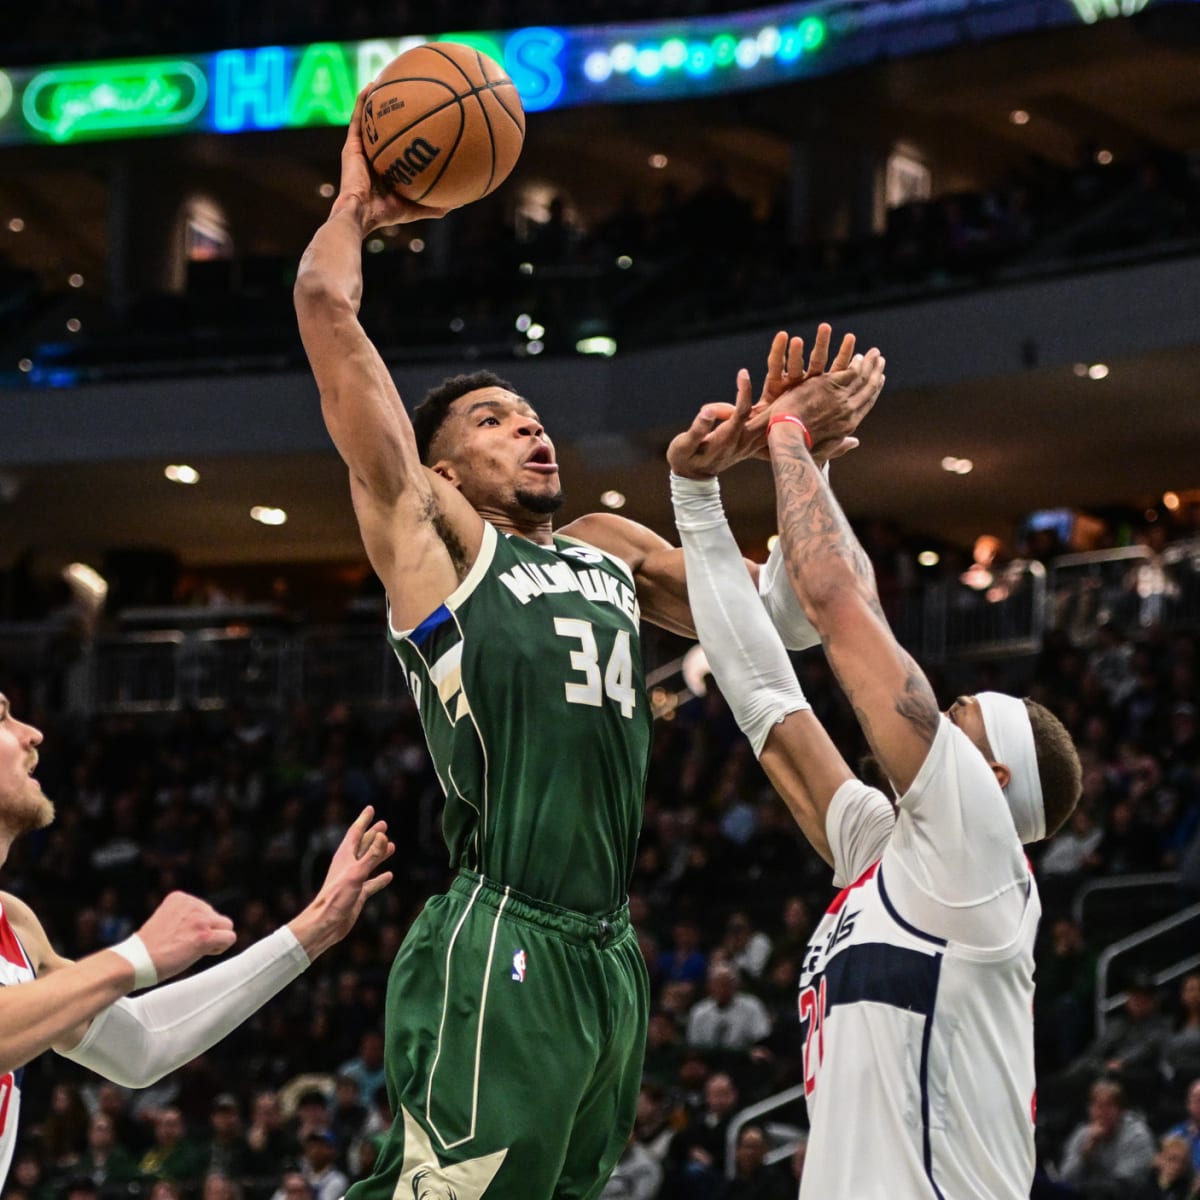 Giannis Antetokounmpo regrets missing a highlight dunk over Daniel